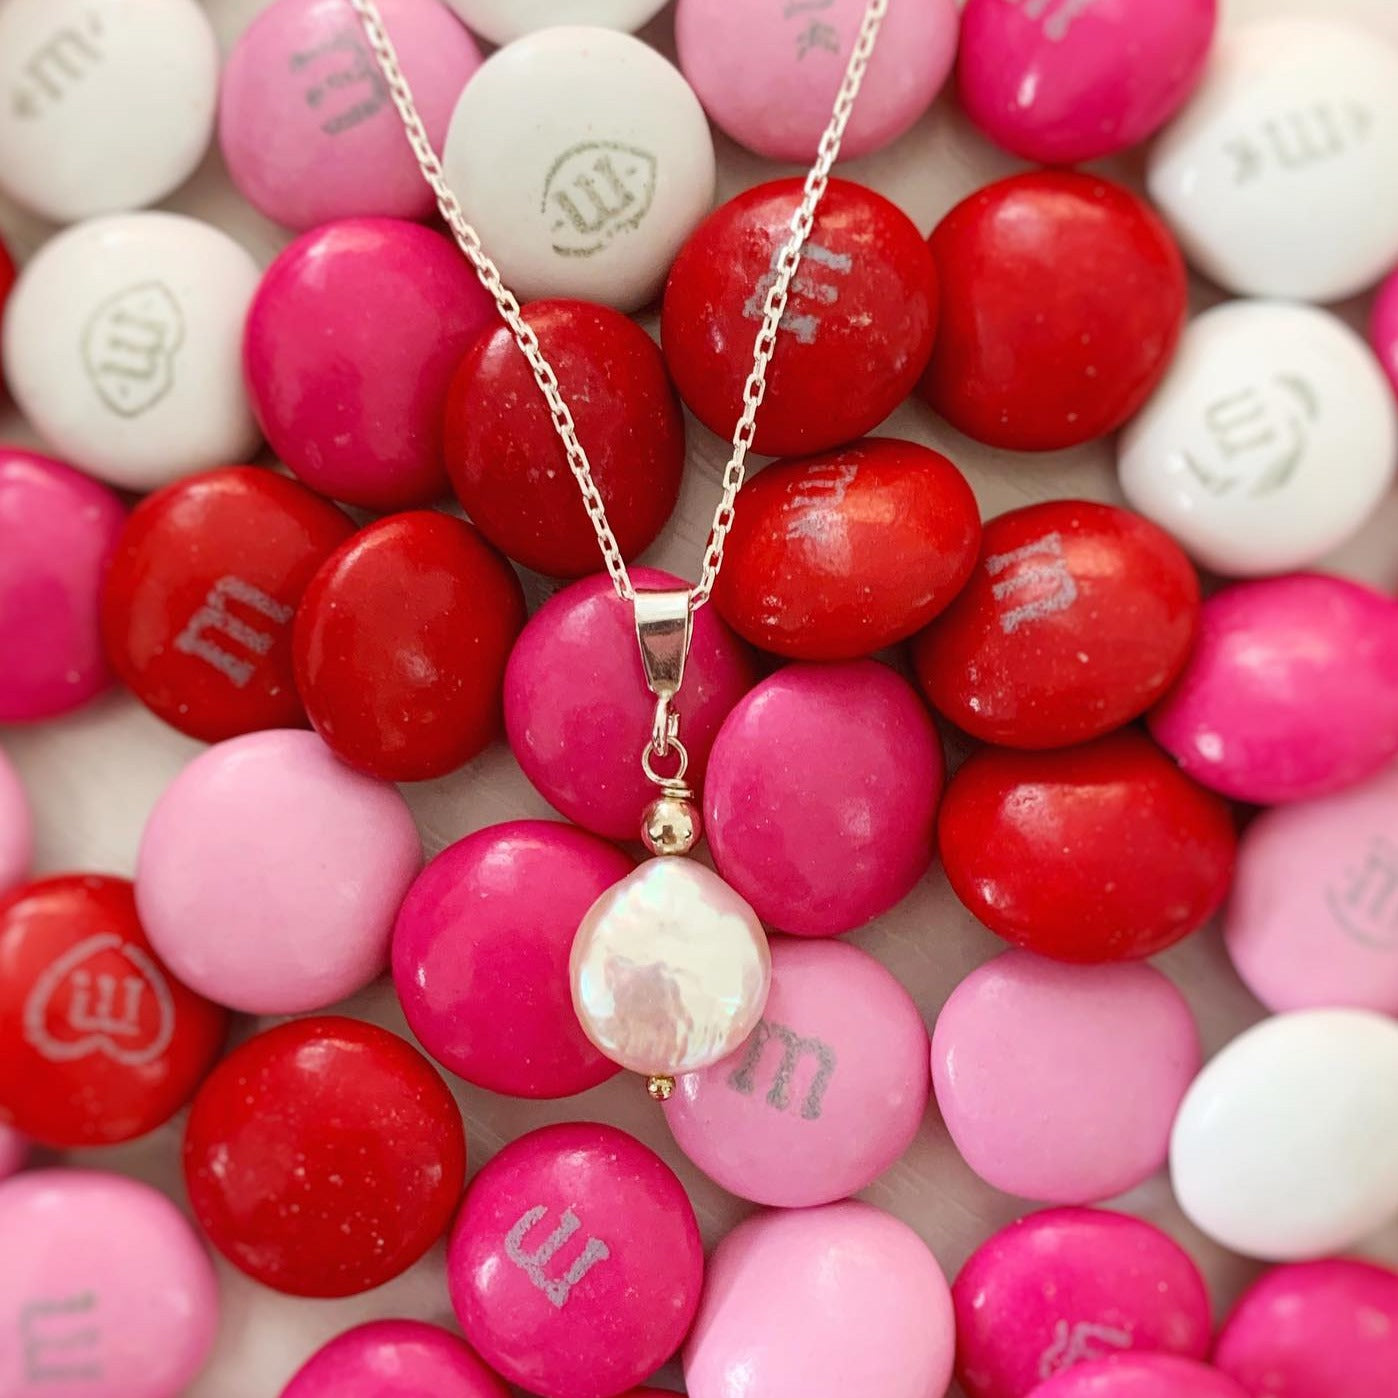 newport pendant necklace by mermaids and madeleines is created with a freshwater coin pearl hanging from sterling silver chain. this necklace is photographed on a bunch of red, pink, and white m&m candies